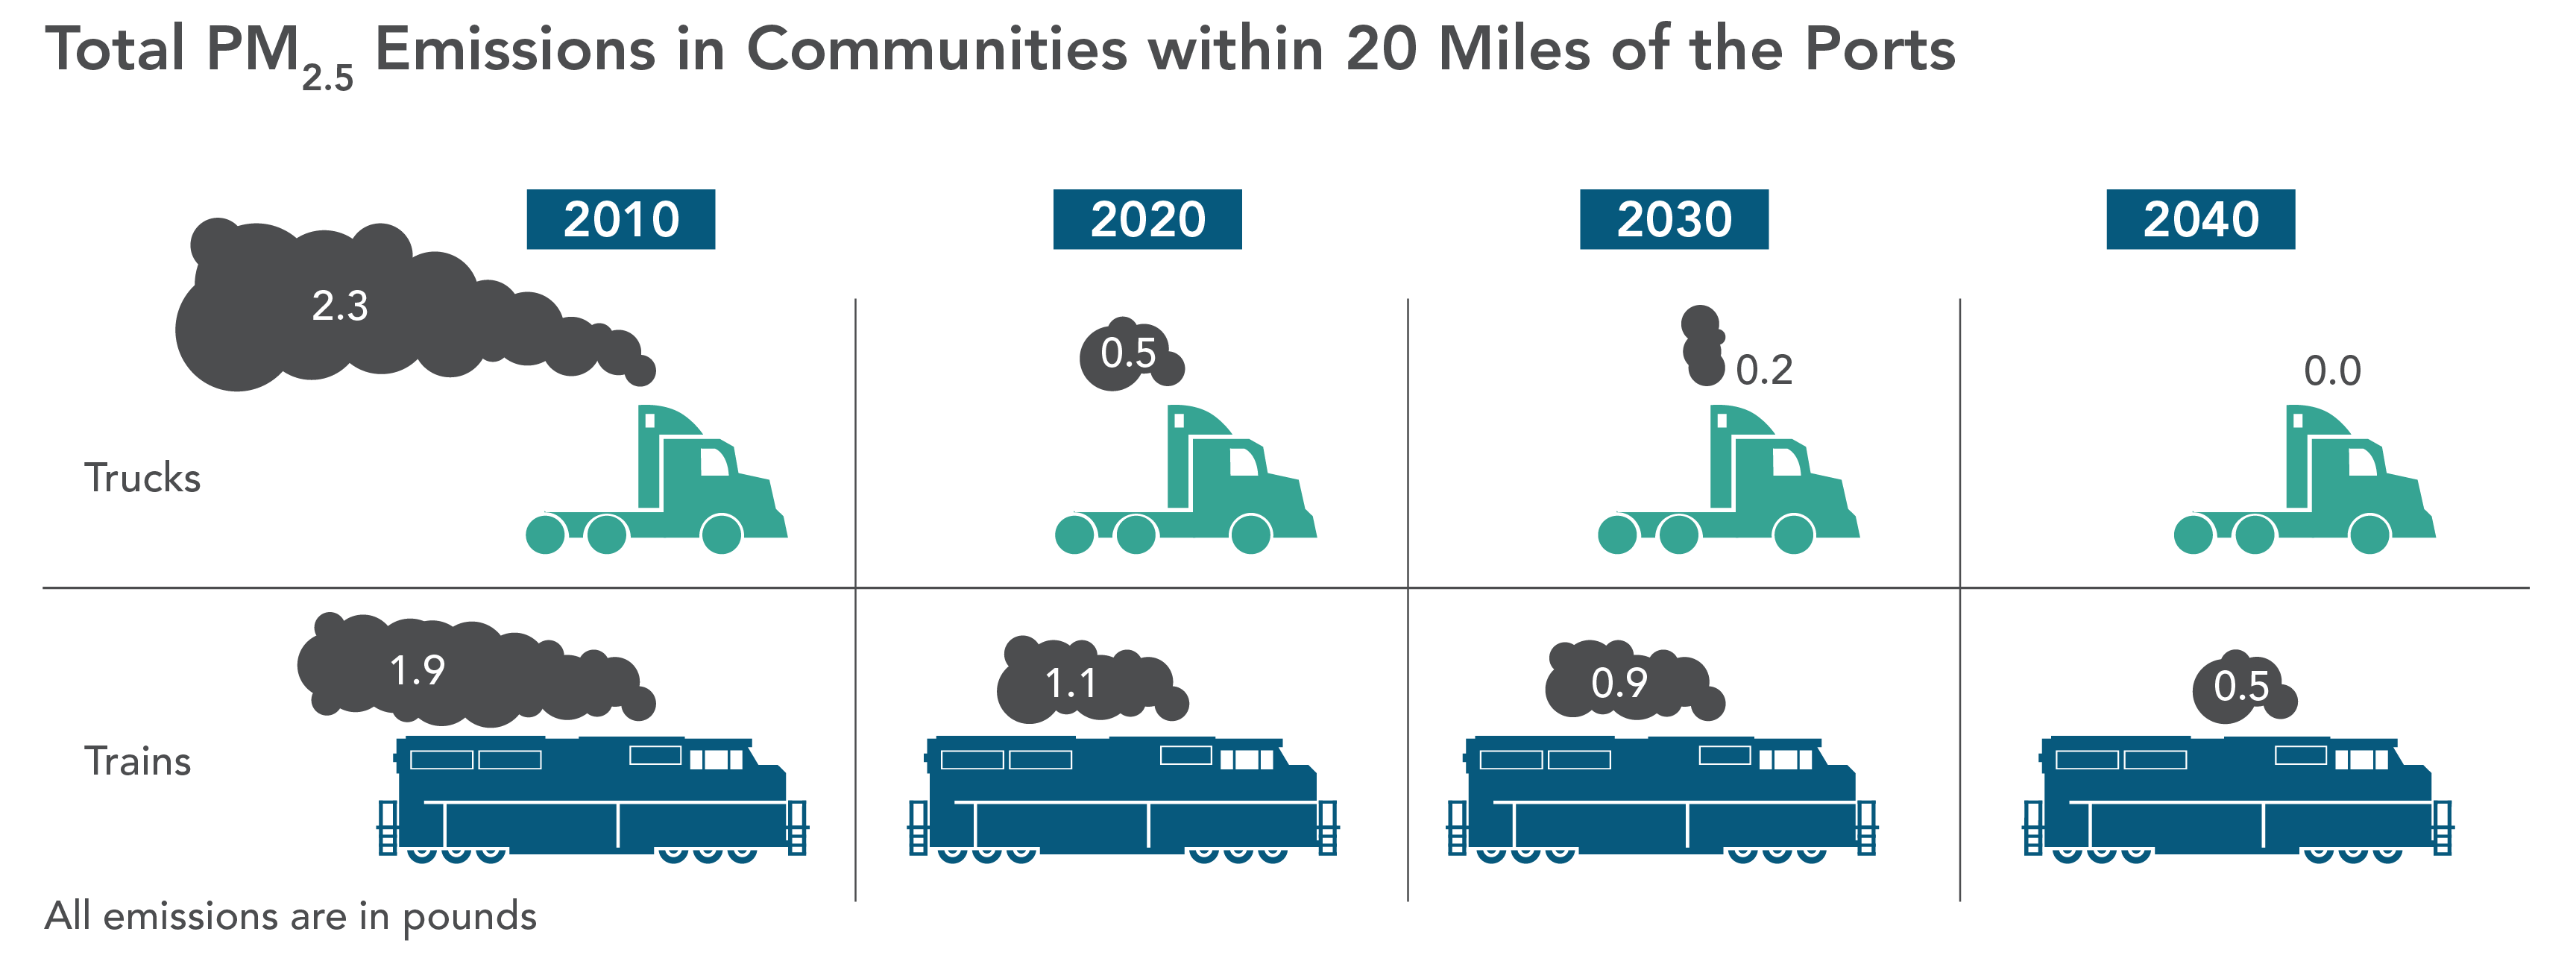 Comparison of truck and train PM 2.5 emissions in communities within 20 miles of the ports.  Trucks emit less PM 2.5 than trains in 2020.